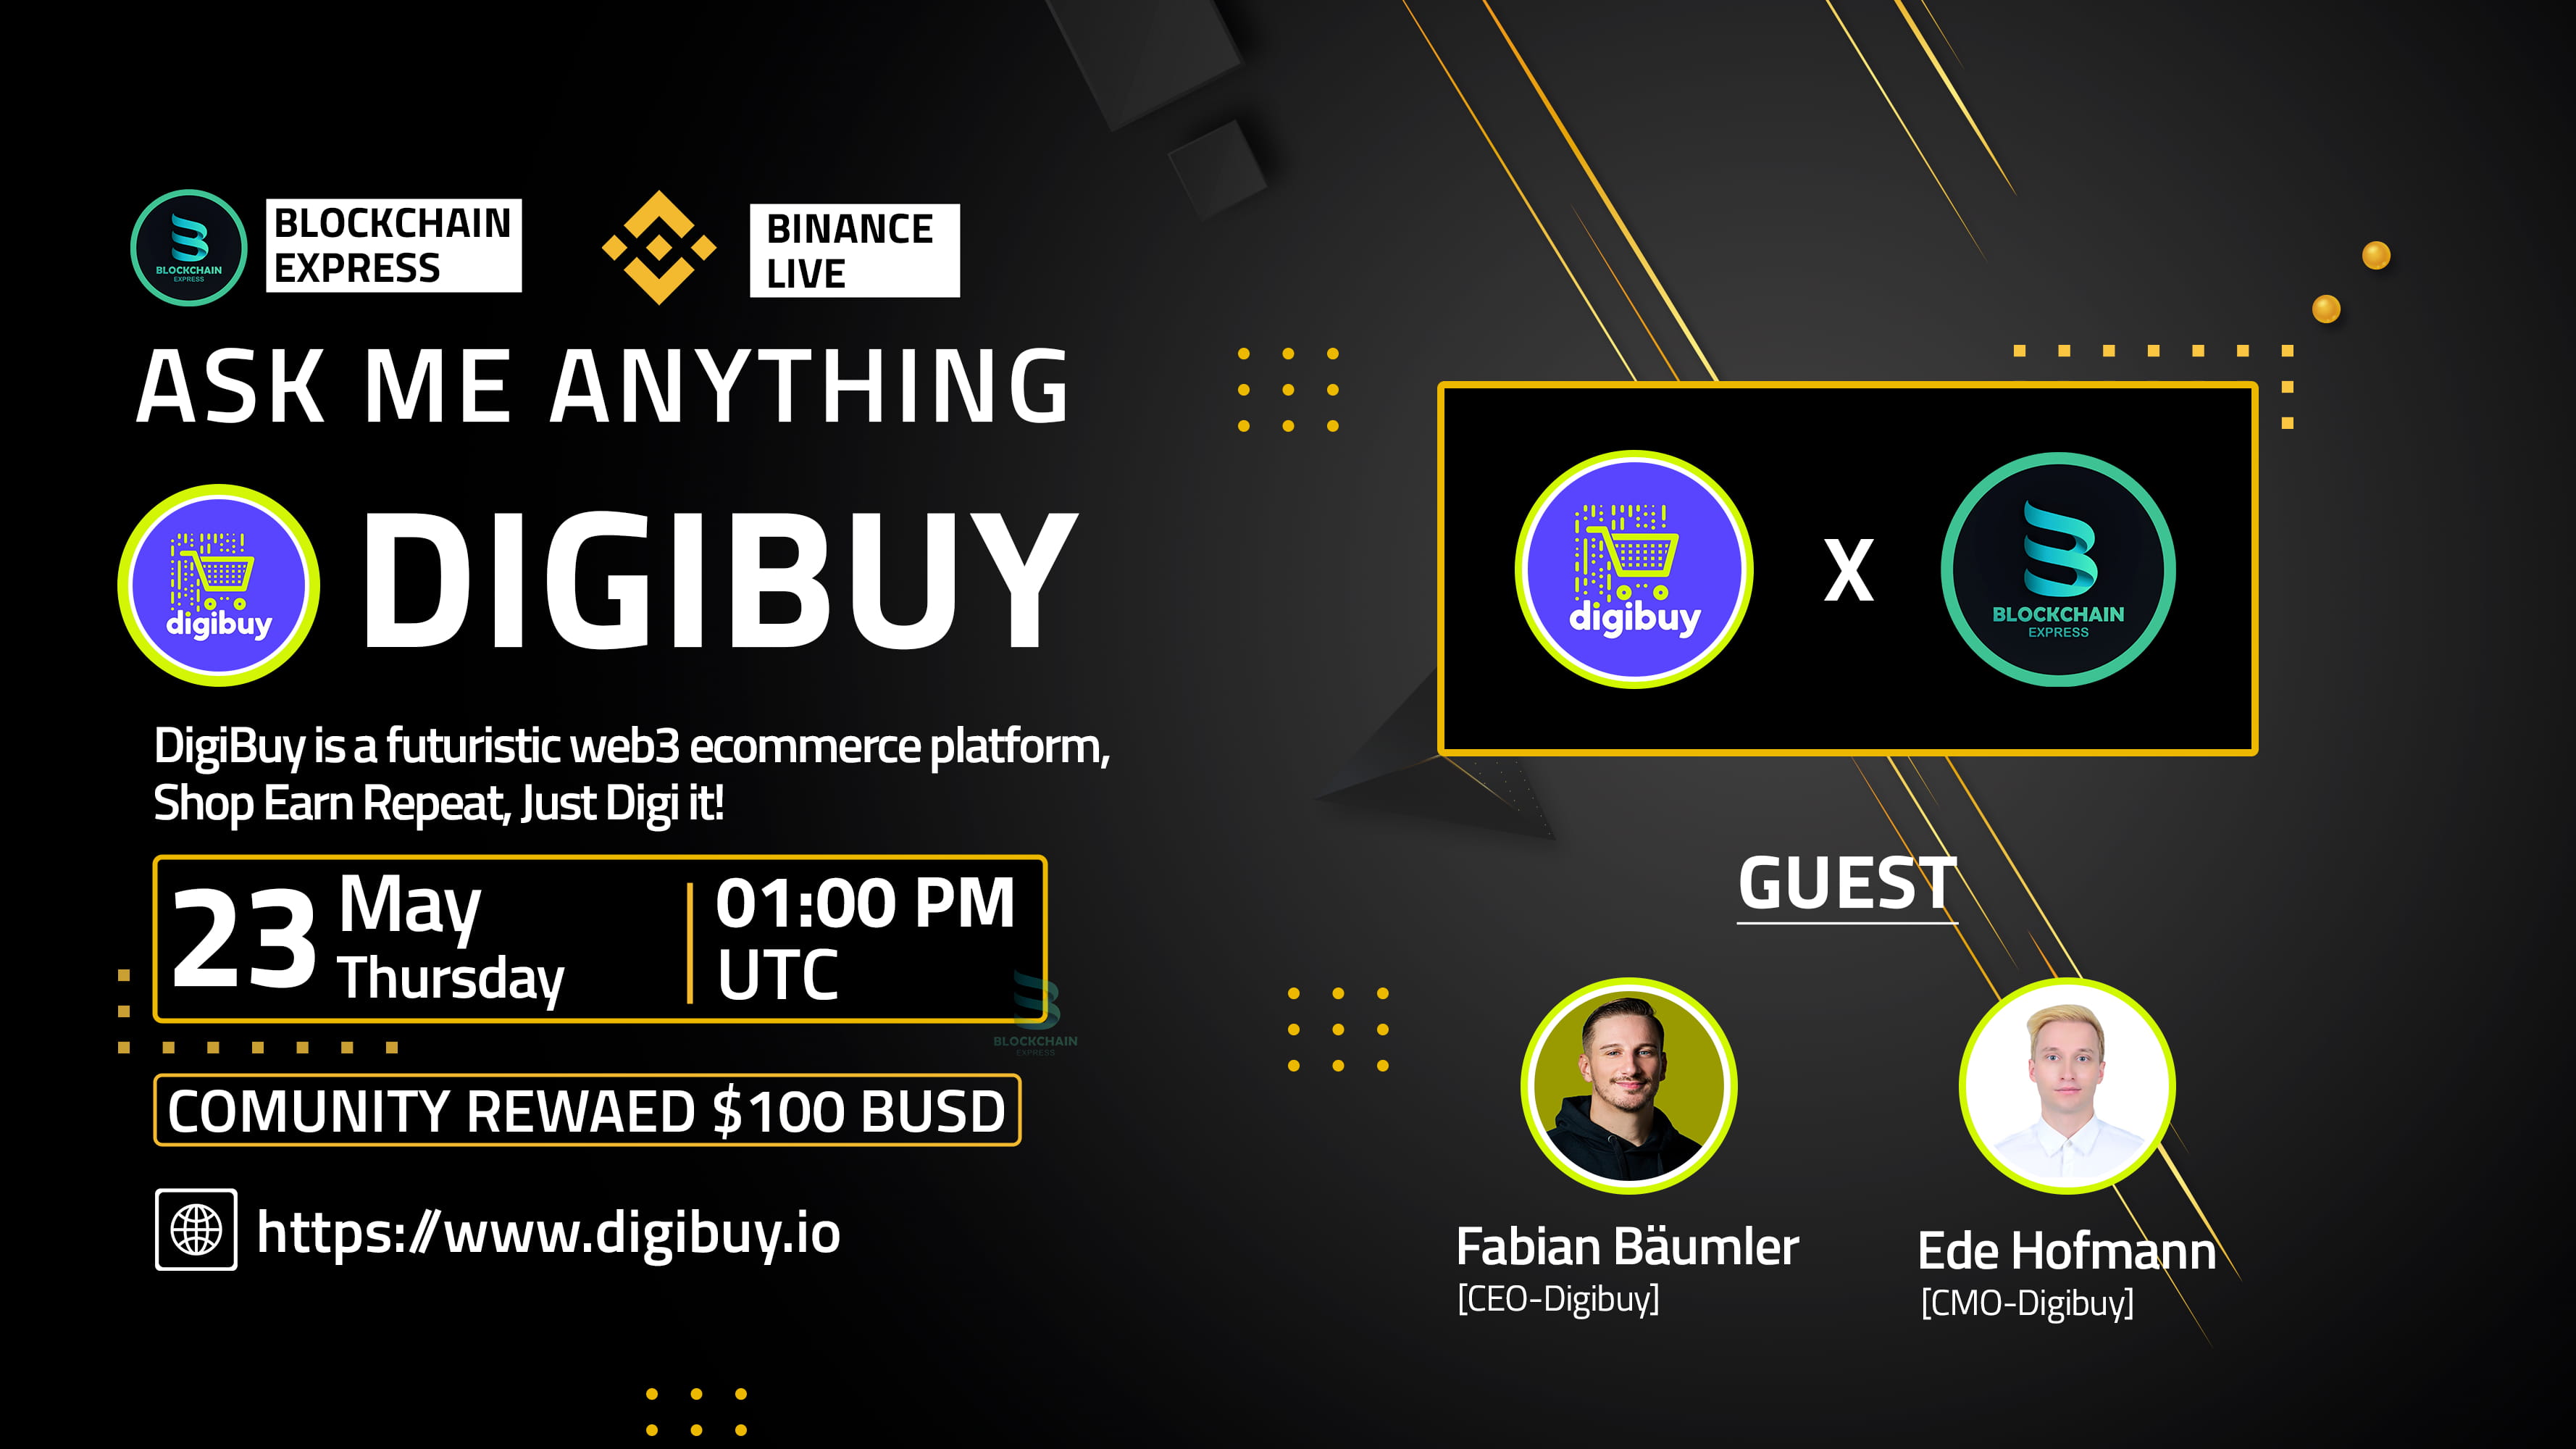 ₿lockchain Express will be hosting an AMA session with" Digibuy "